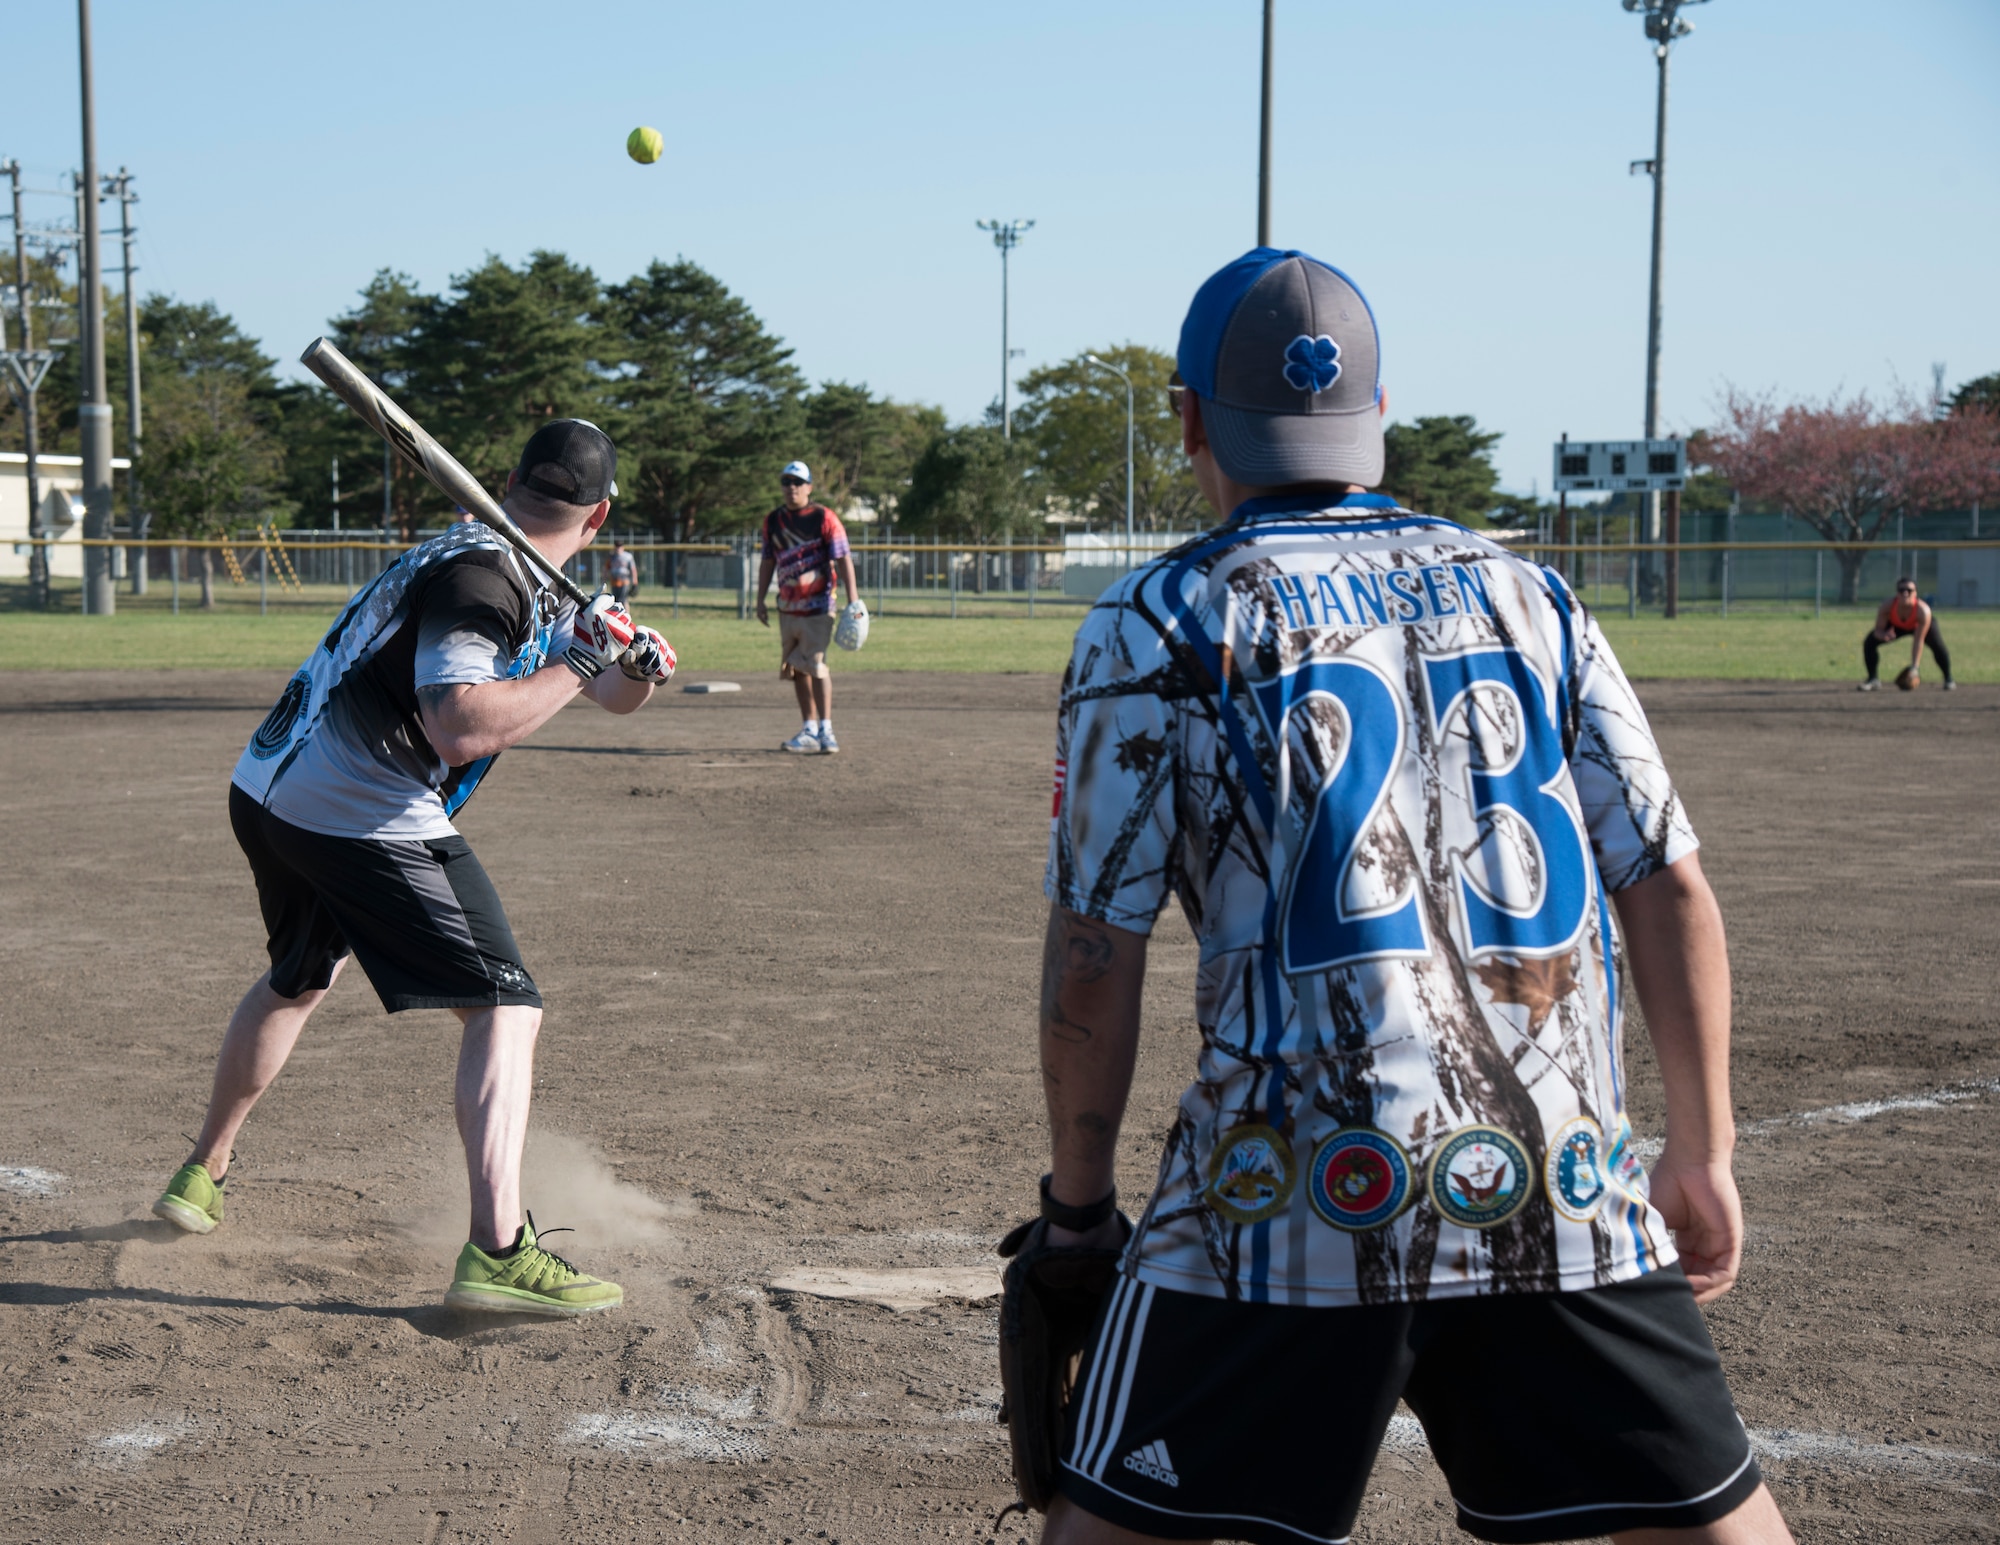 U.S. Air Force 35th Security Forces Squadron members square off against the 35th Medical Operations Squadron during the 2019 Cinco de Mayo softball tournament at Misawa Air Base, Japan, May 4, 2019. This softball tournament helped bolster teamwork and relations between different units through a sporting event. (U.S. Air Force photo by Branden Yamada)